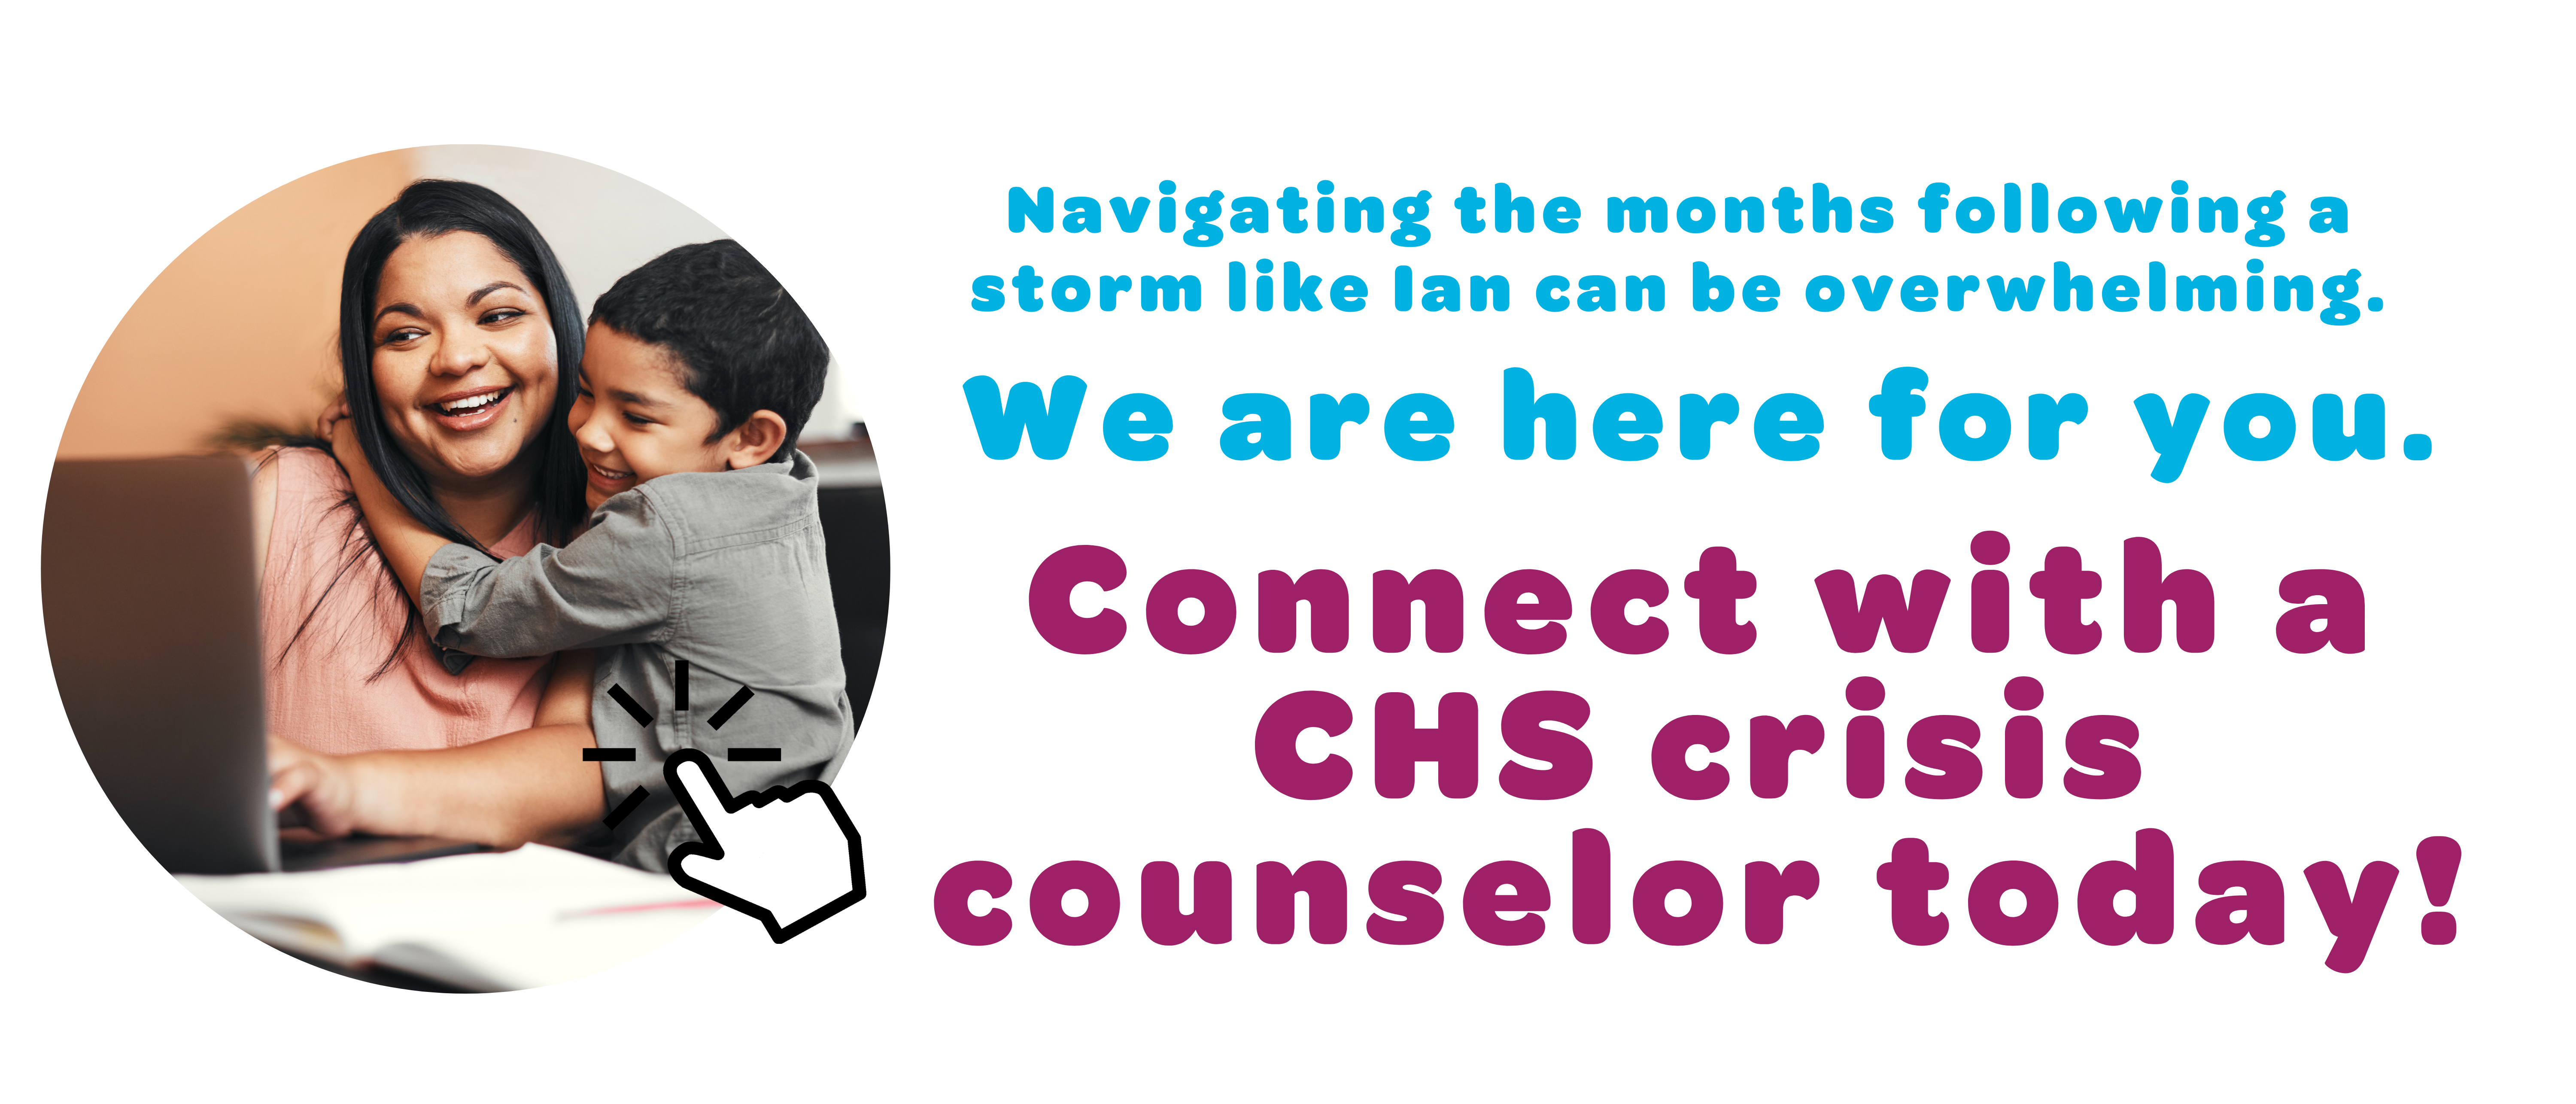 Navigating the months following a storm like Ian can be overwhelming. We are here for you. Connect with a CHS crisis counselor today!